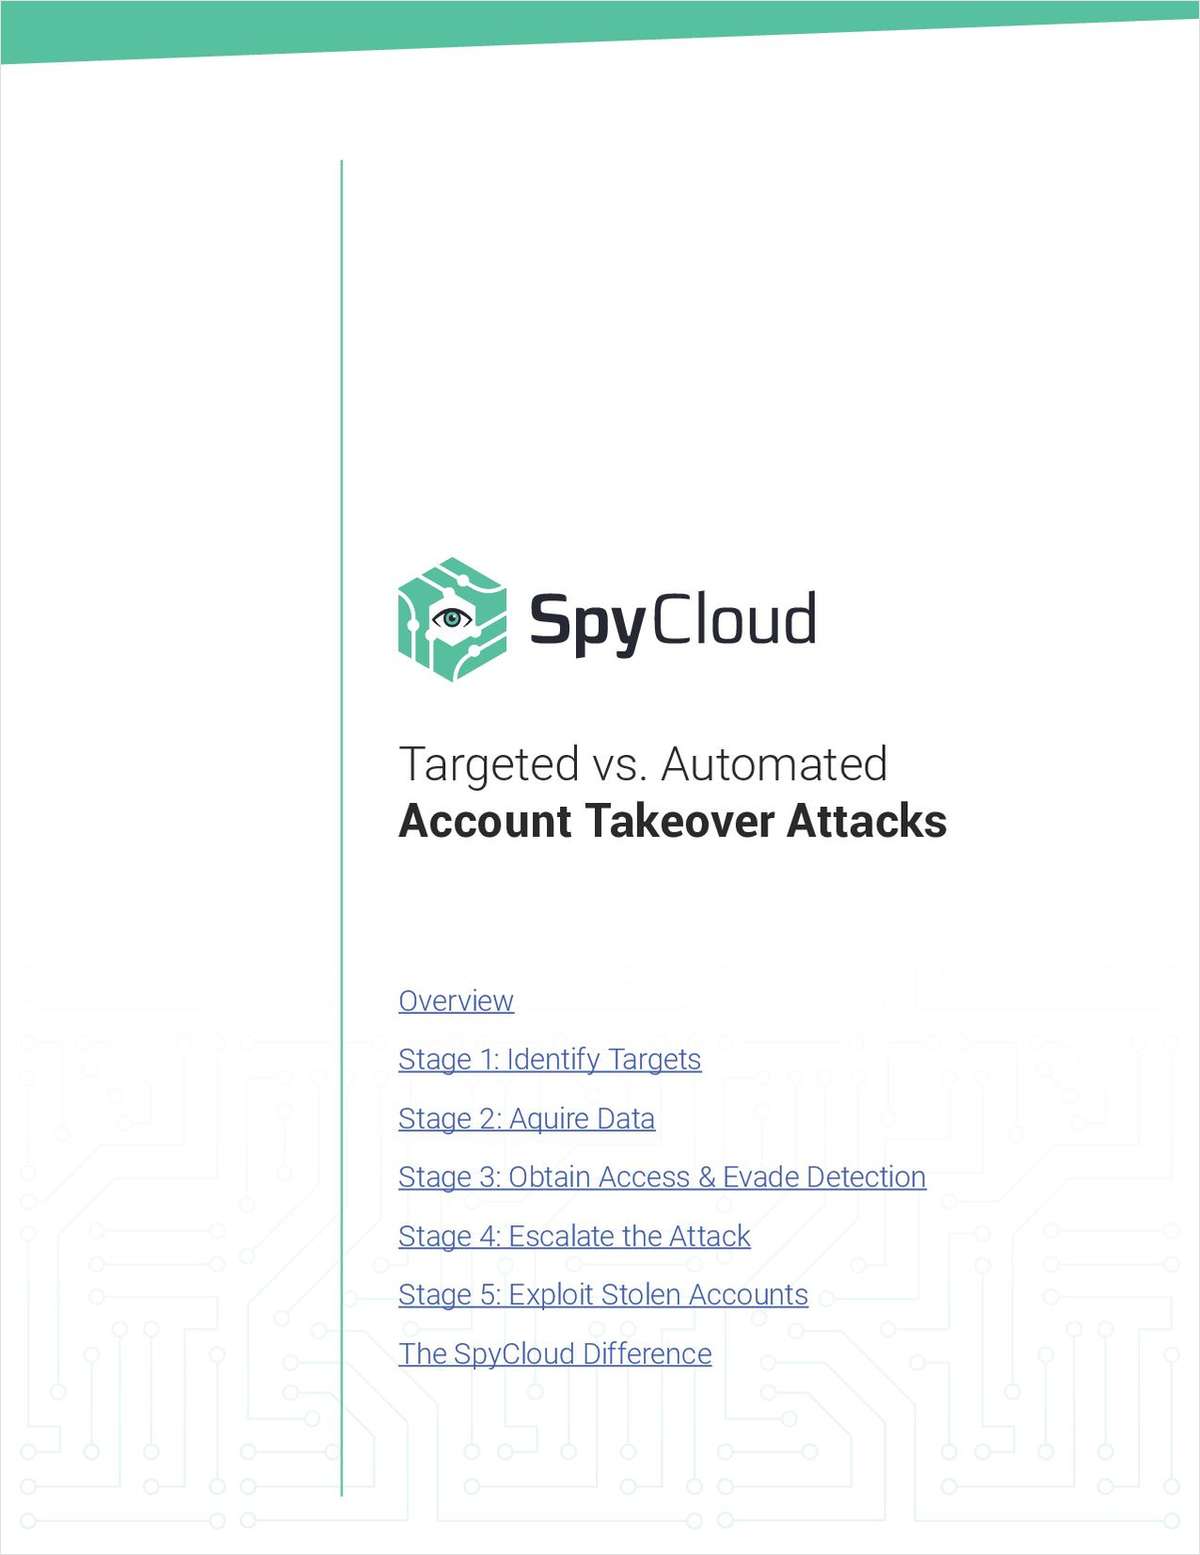 Targeted vs. Automated Account Takeover Attacks: What's the Difference?